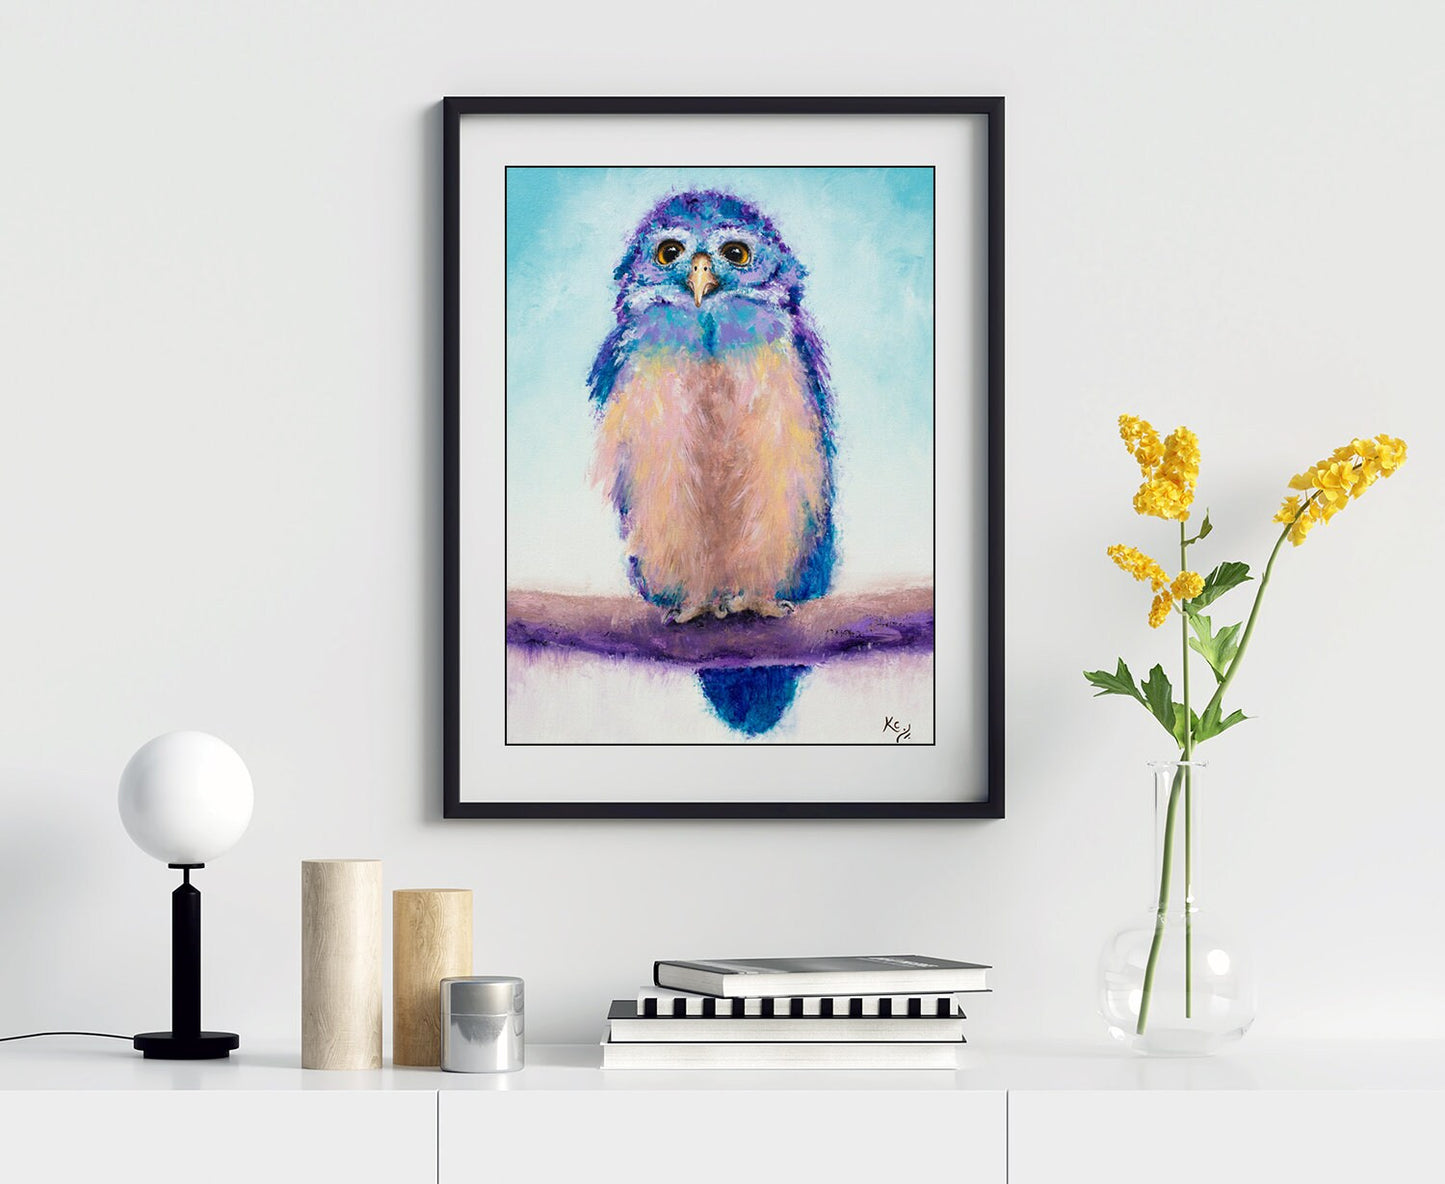 Owl Art Print on PAPER or CANVAS - Owl Painting for Wall Decor or Gifts by Krystle Cole